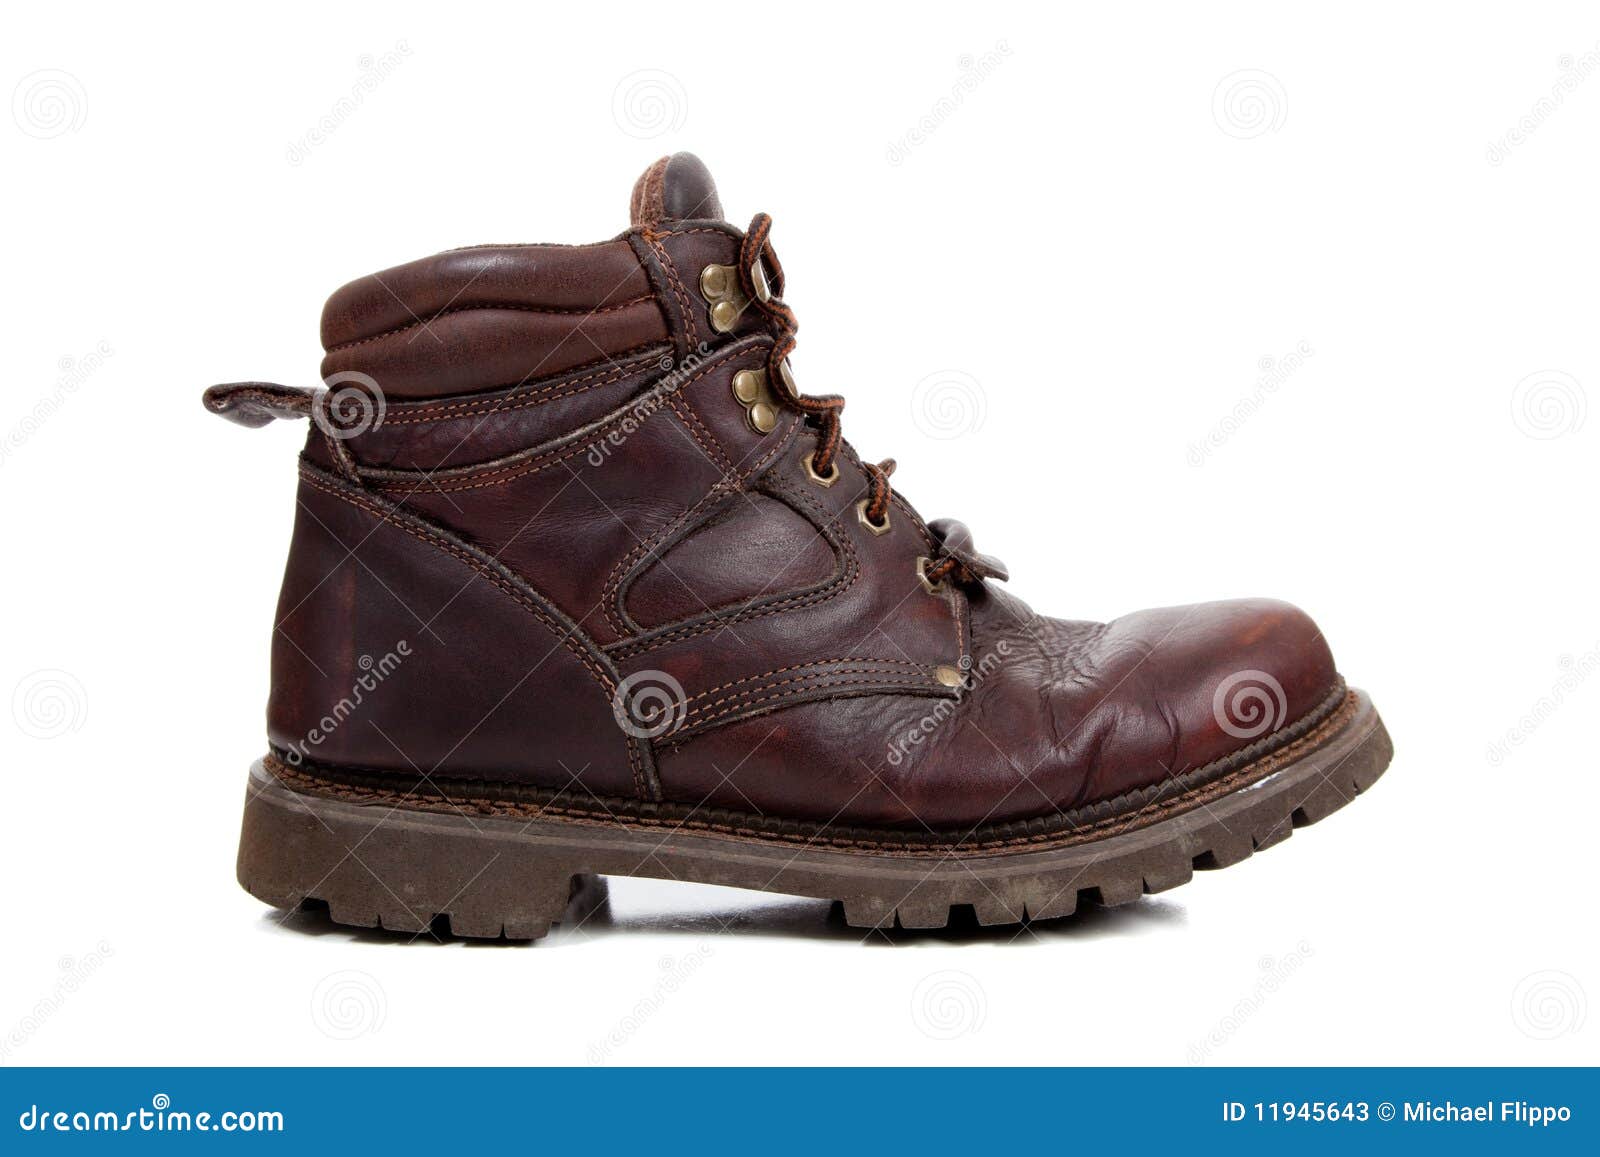 A Brown Leather Hiking Boot on White Stock Image - Image of sole, shoe ...